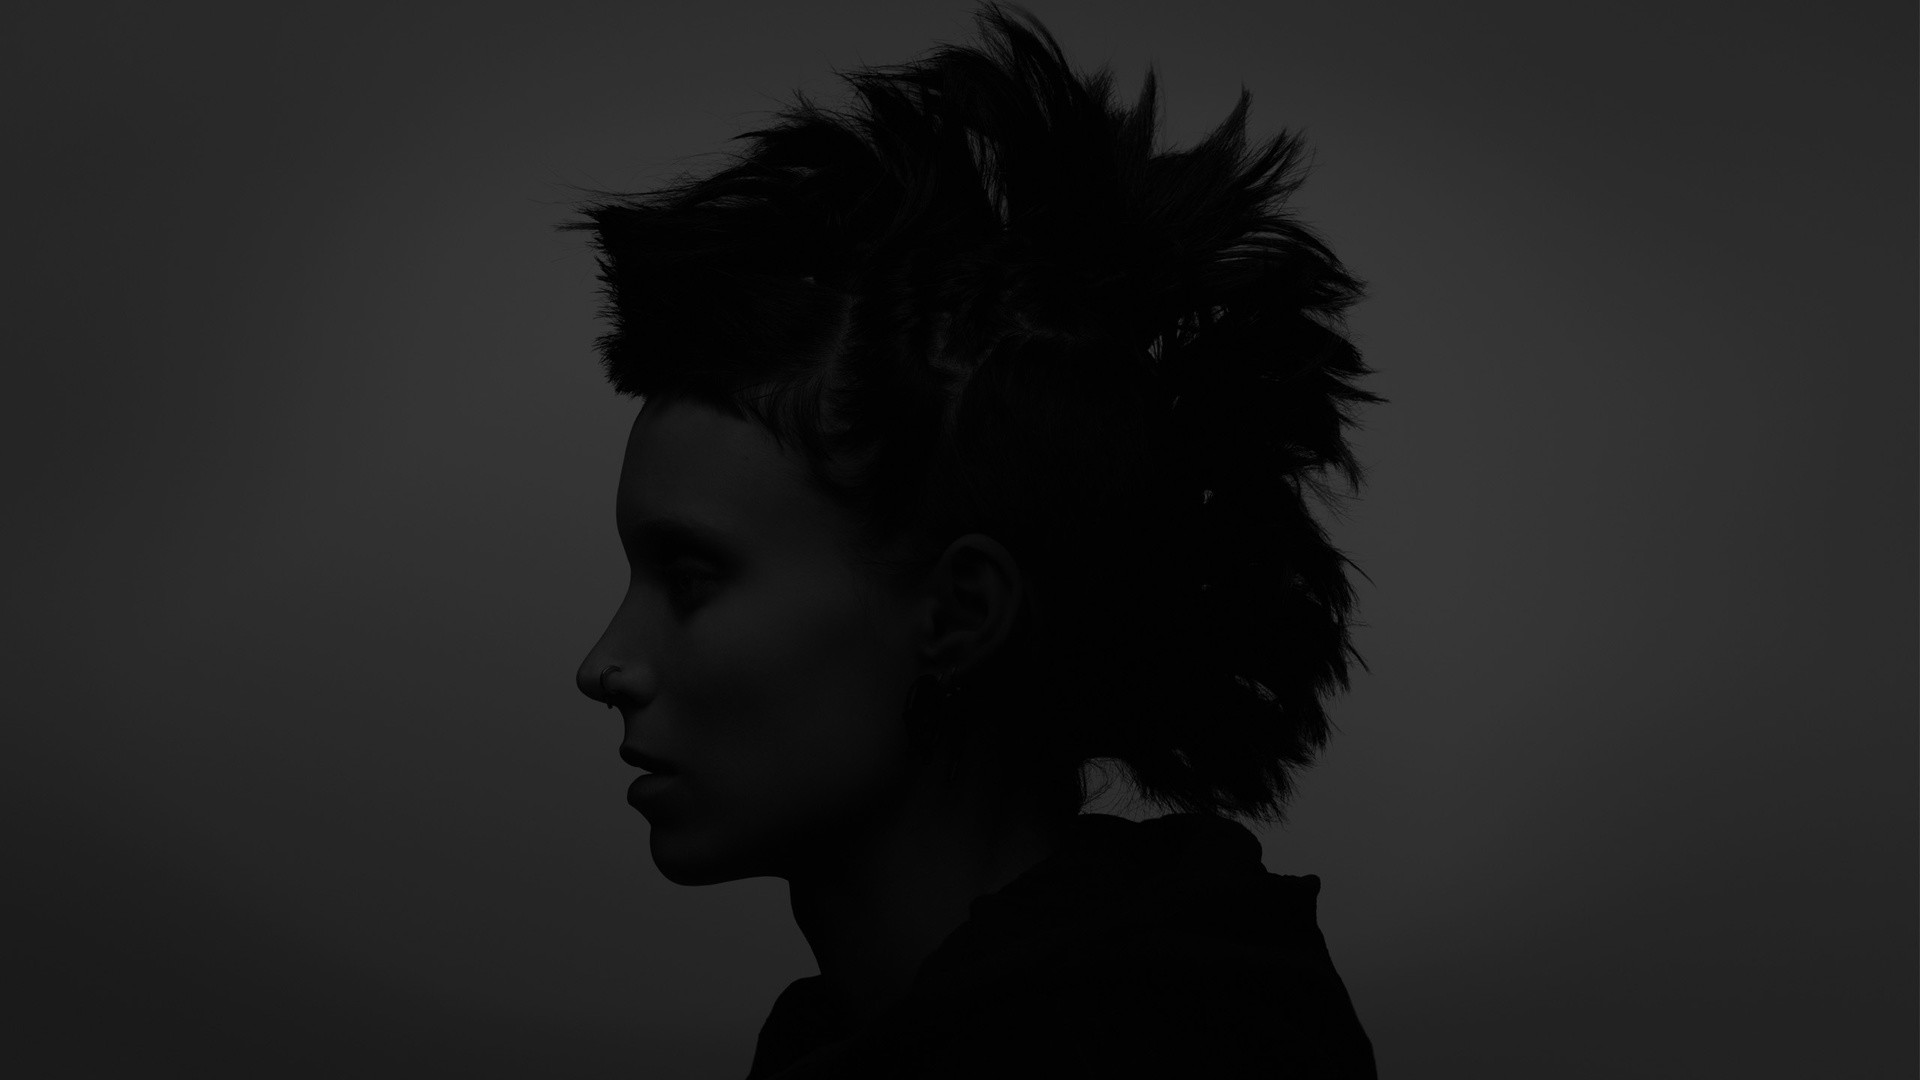 1920x1080 The Girl With The Dragon Tattoo Full HD Wallpaper